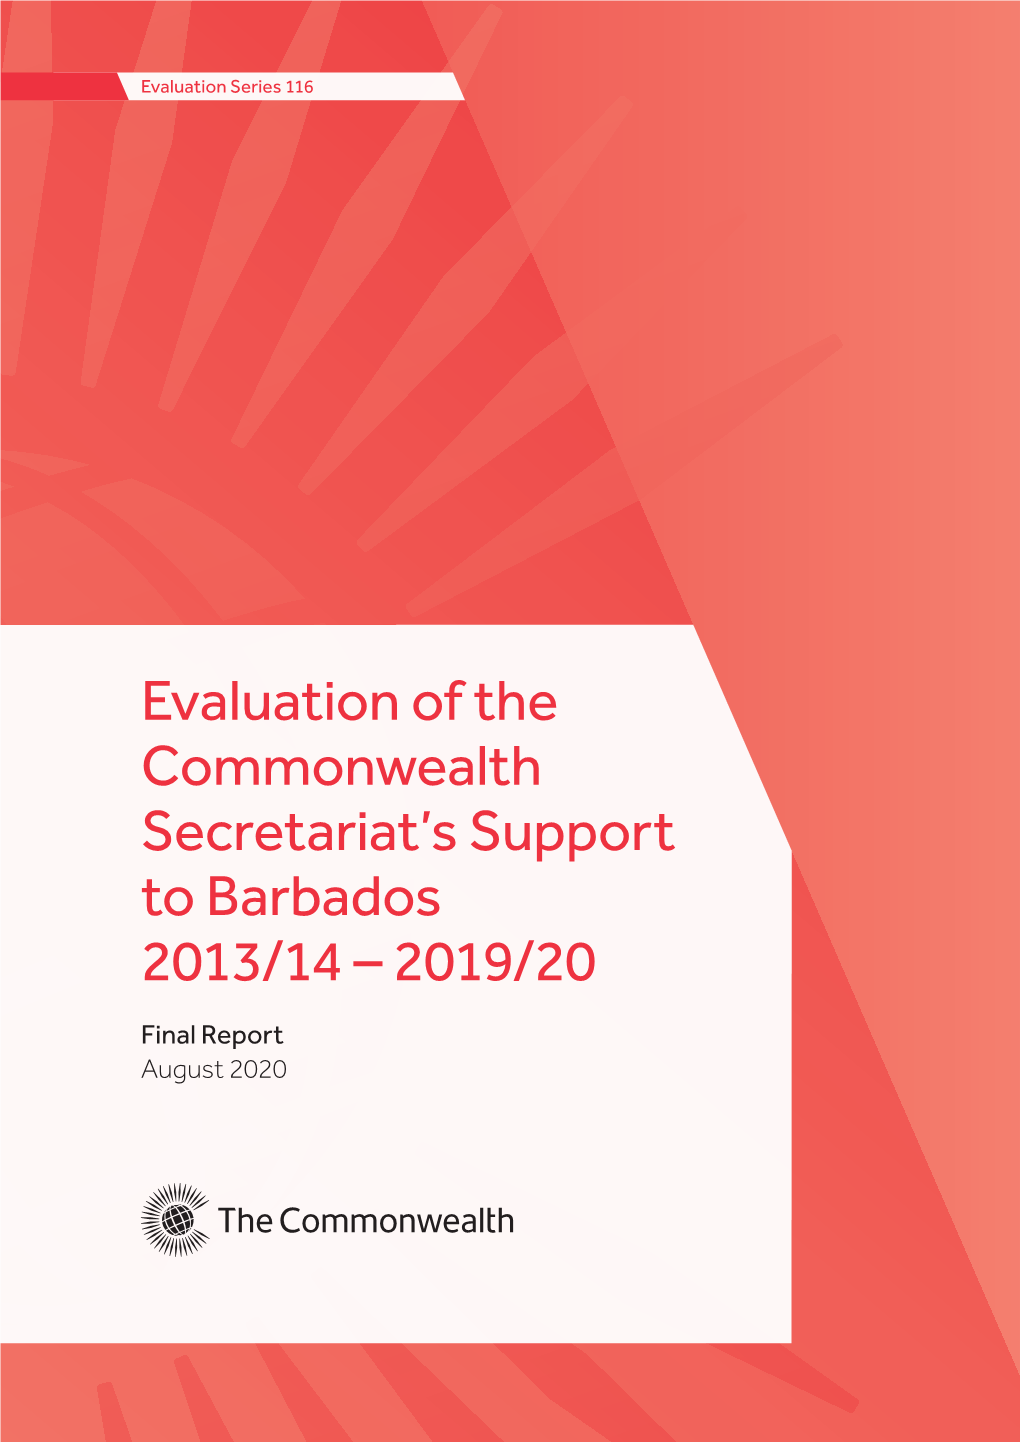 Evaluation of the Commonwealth Secretariat's Support to Barbados